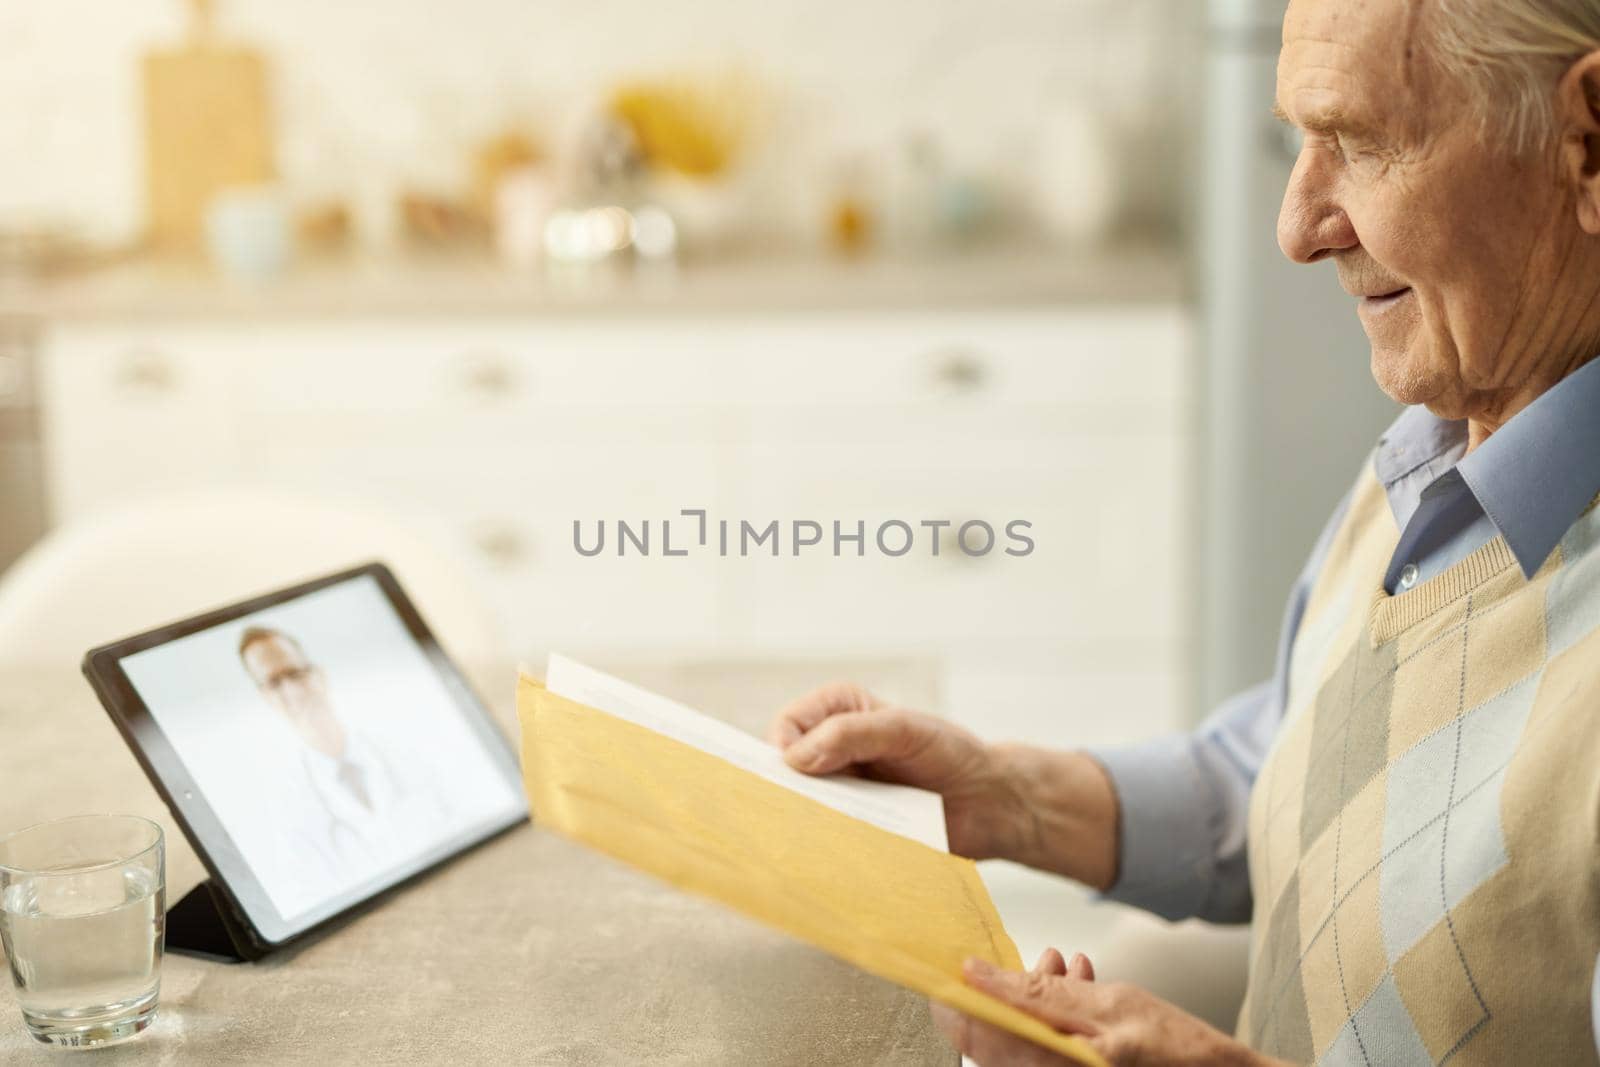 Copy-space photo of an eldelry man holding a yellow parcel while contacting his doctor online